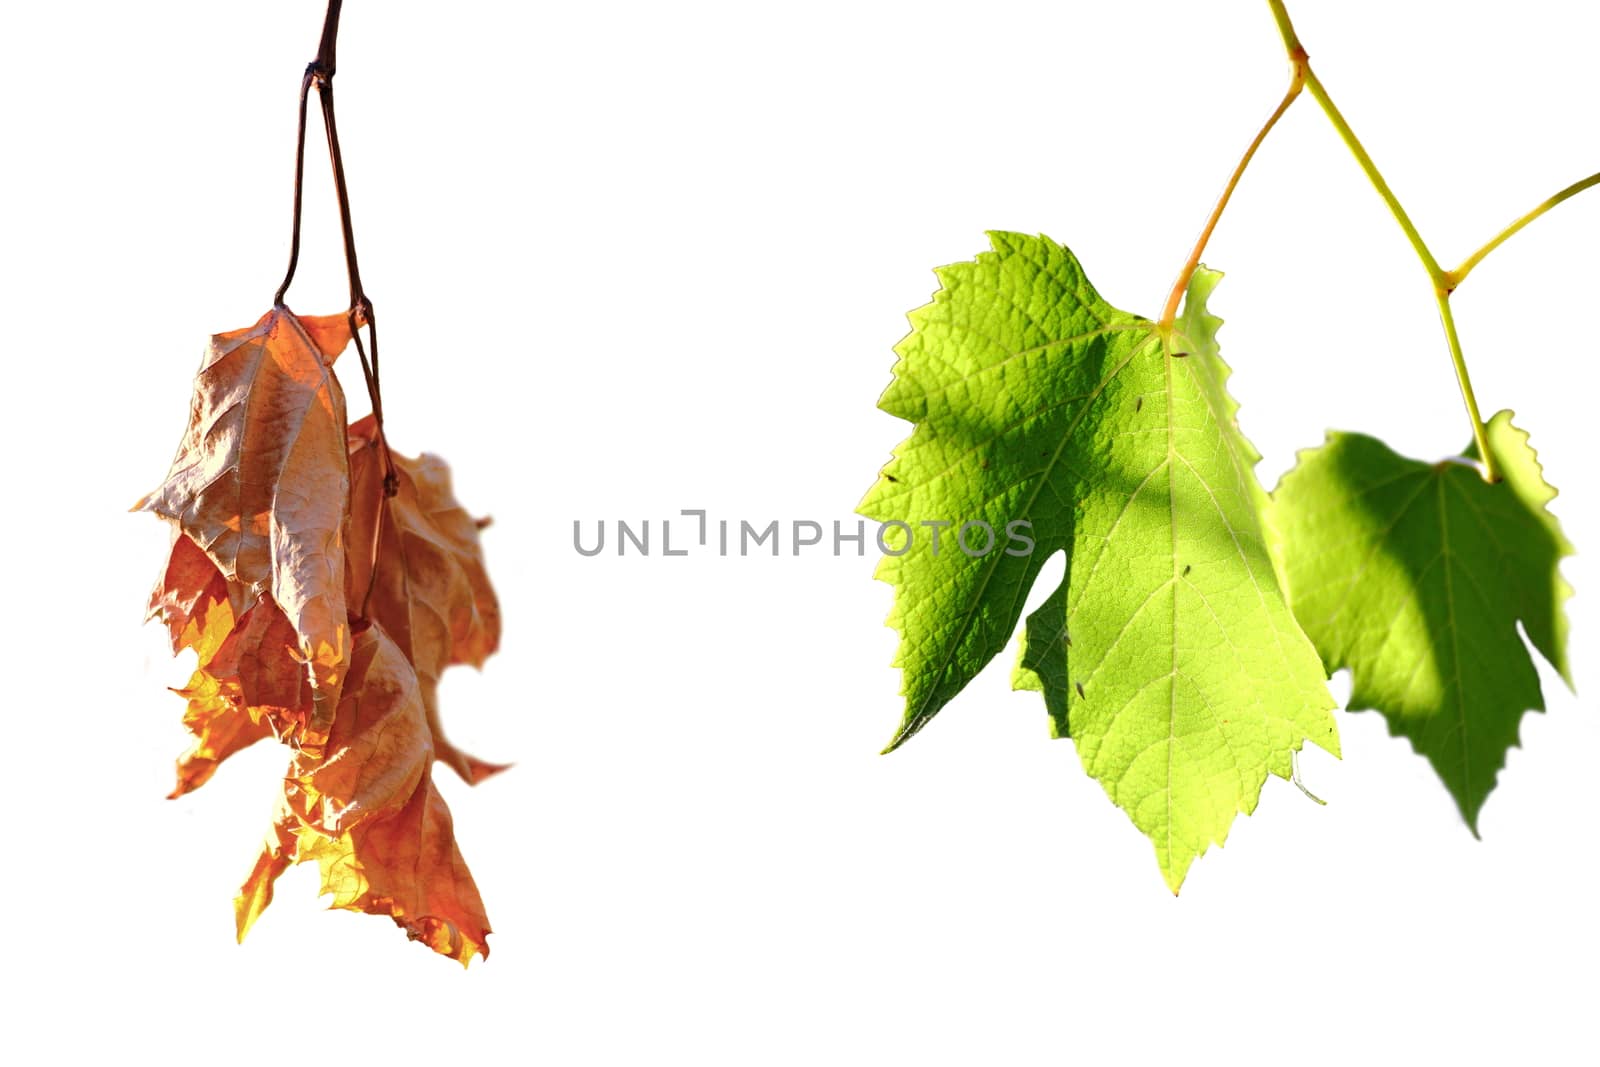 life and death concept, green and faded wineyard leafs isolated over white, contrast